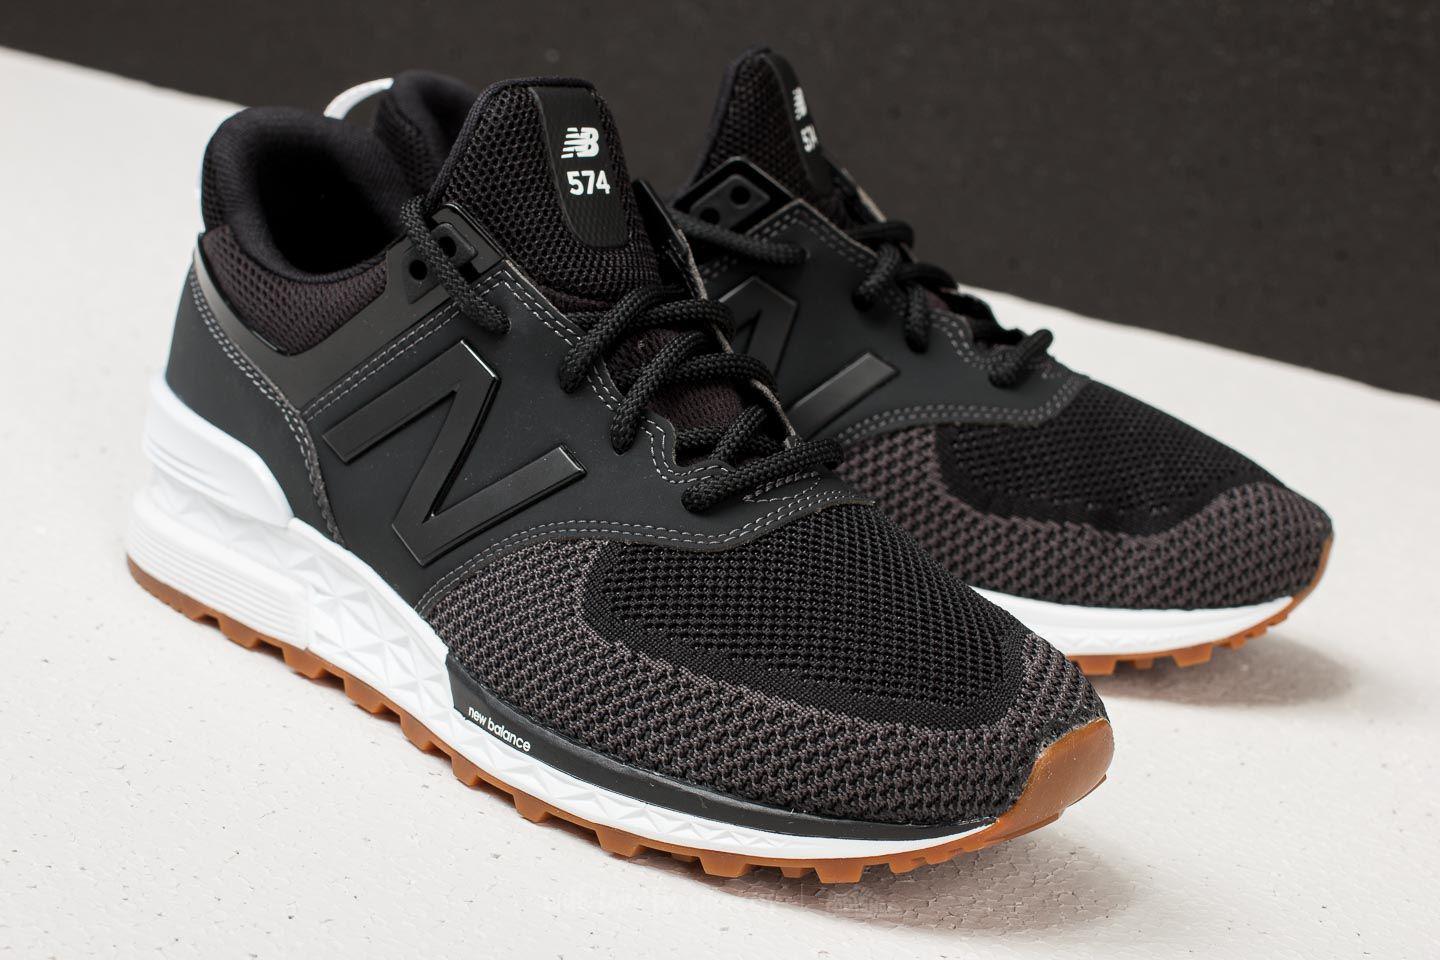 New Balance Rubber 574 Magnet/ Grey in 